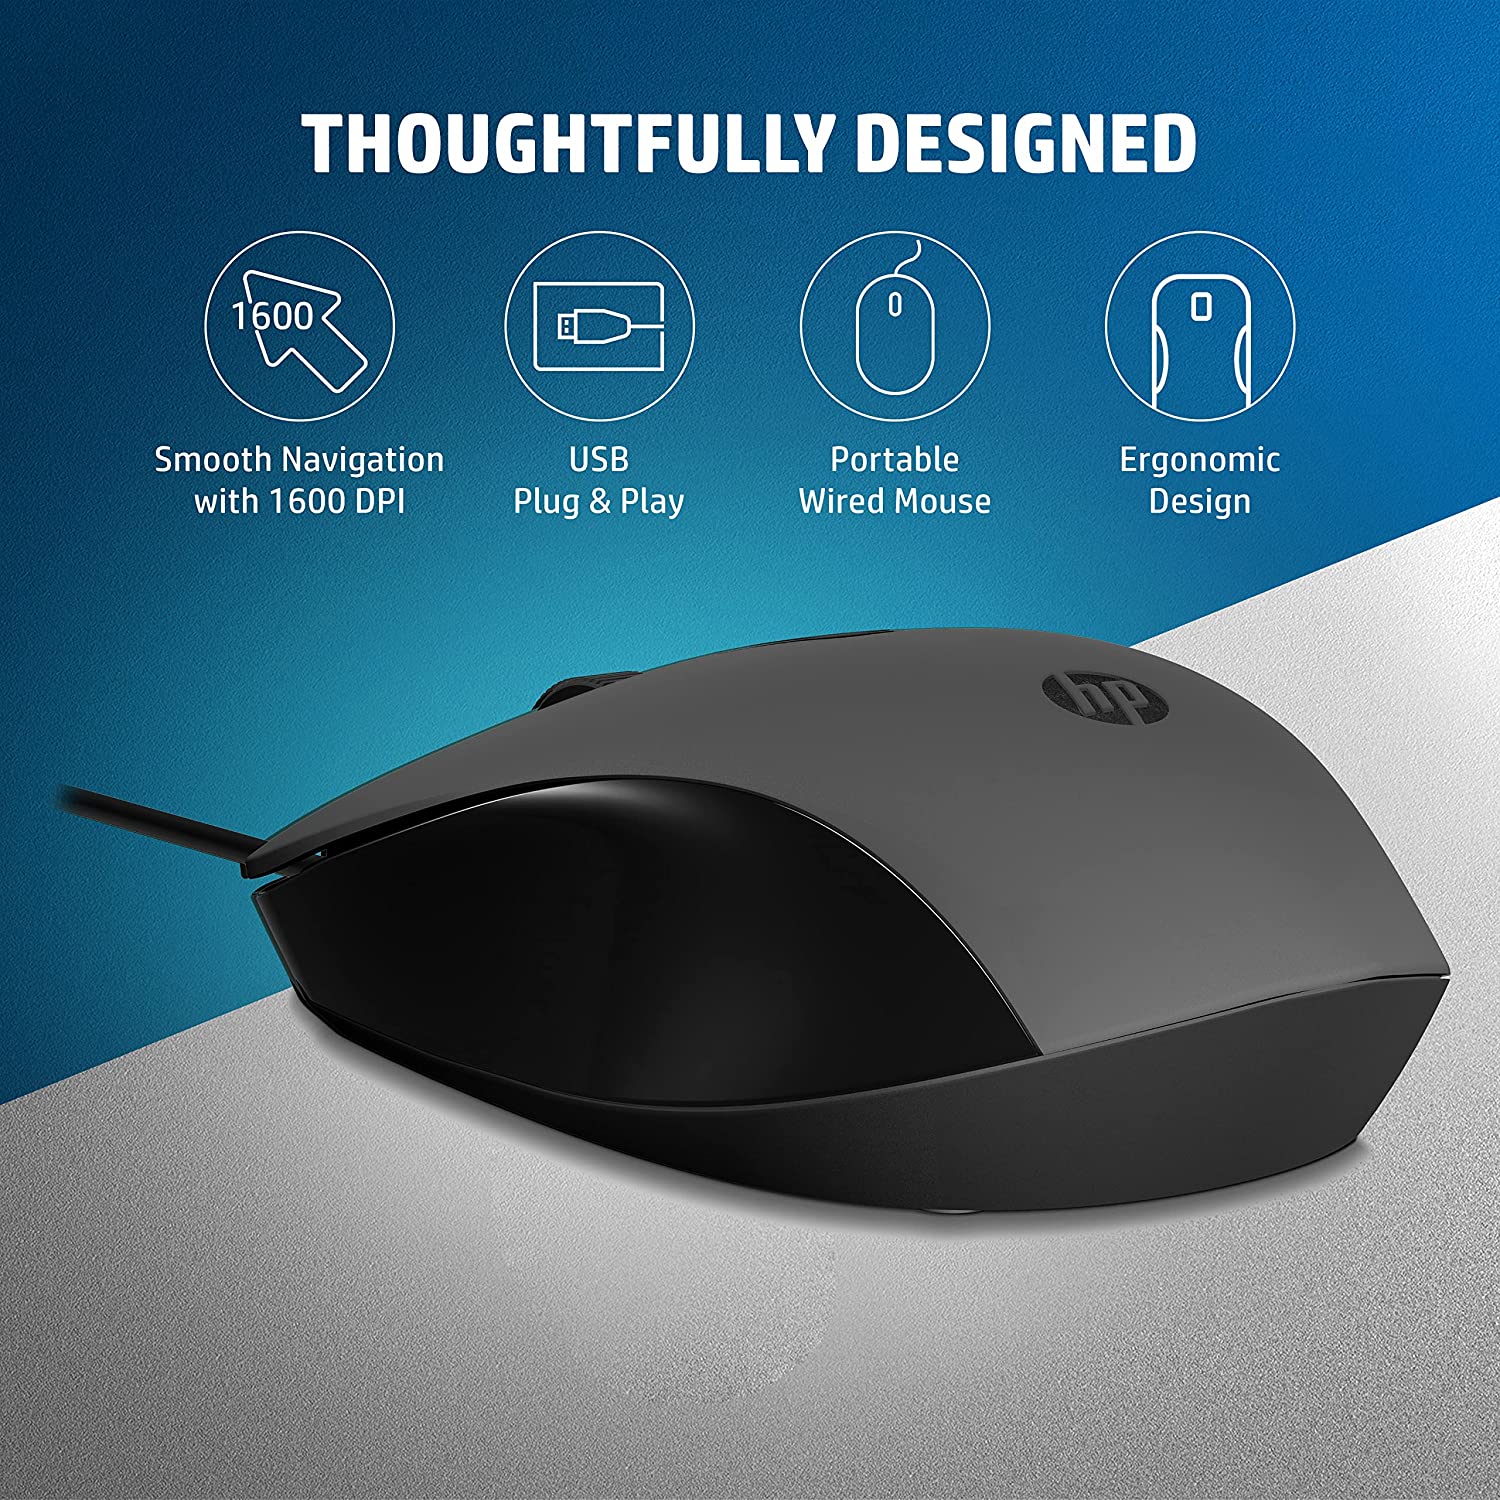 Mouse All Types - HP MOUSE USB 150 3 Years Warranty 1600 DPI Optical Tracking